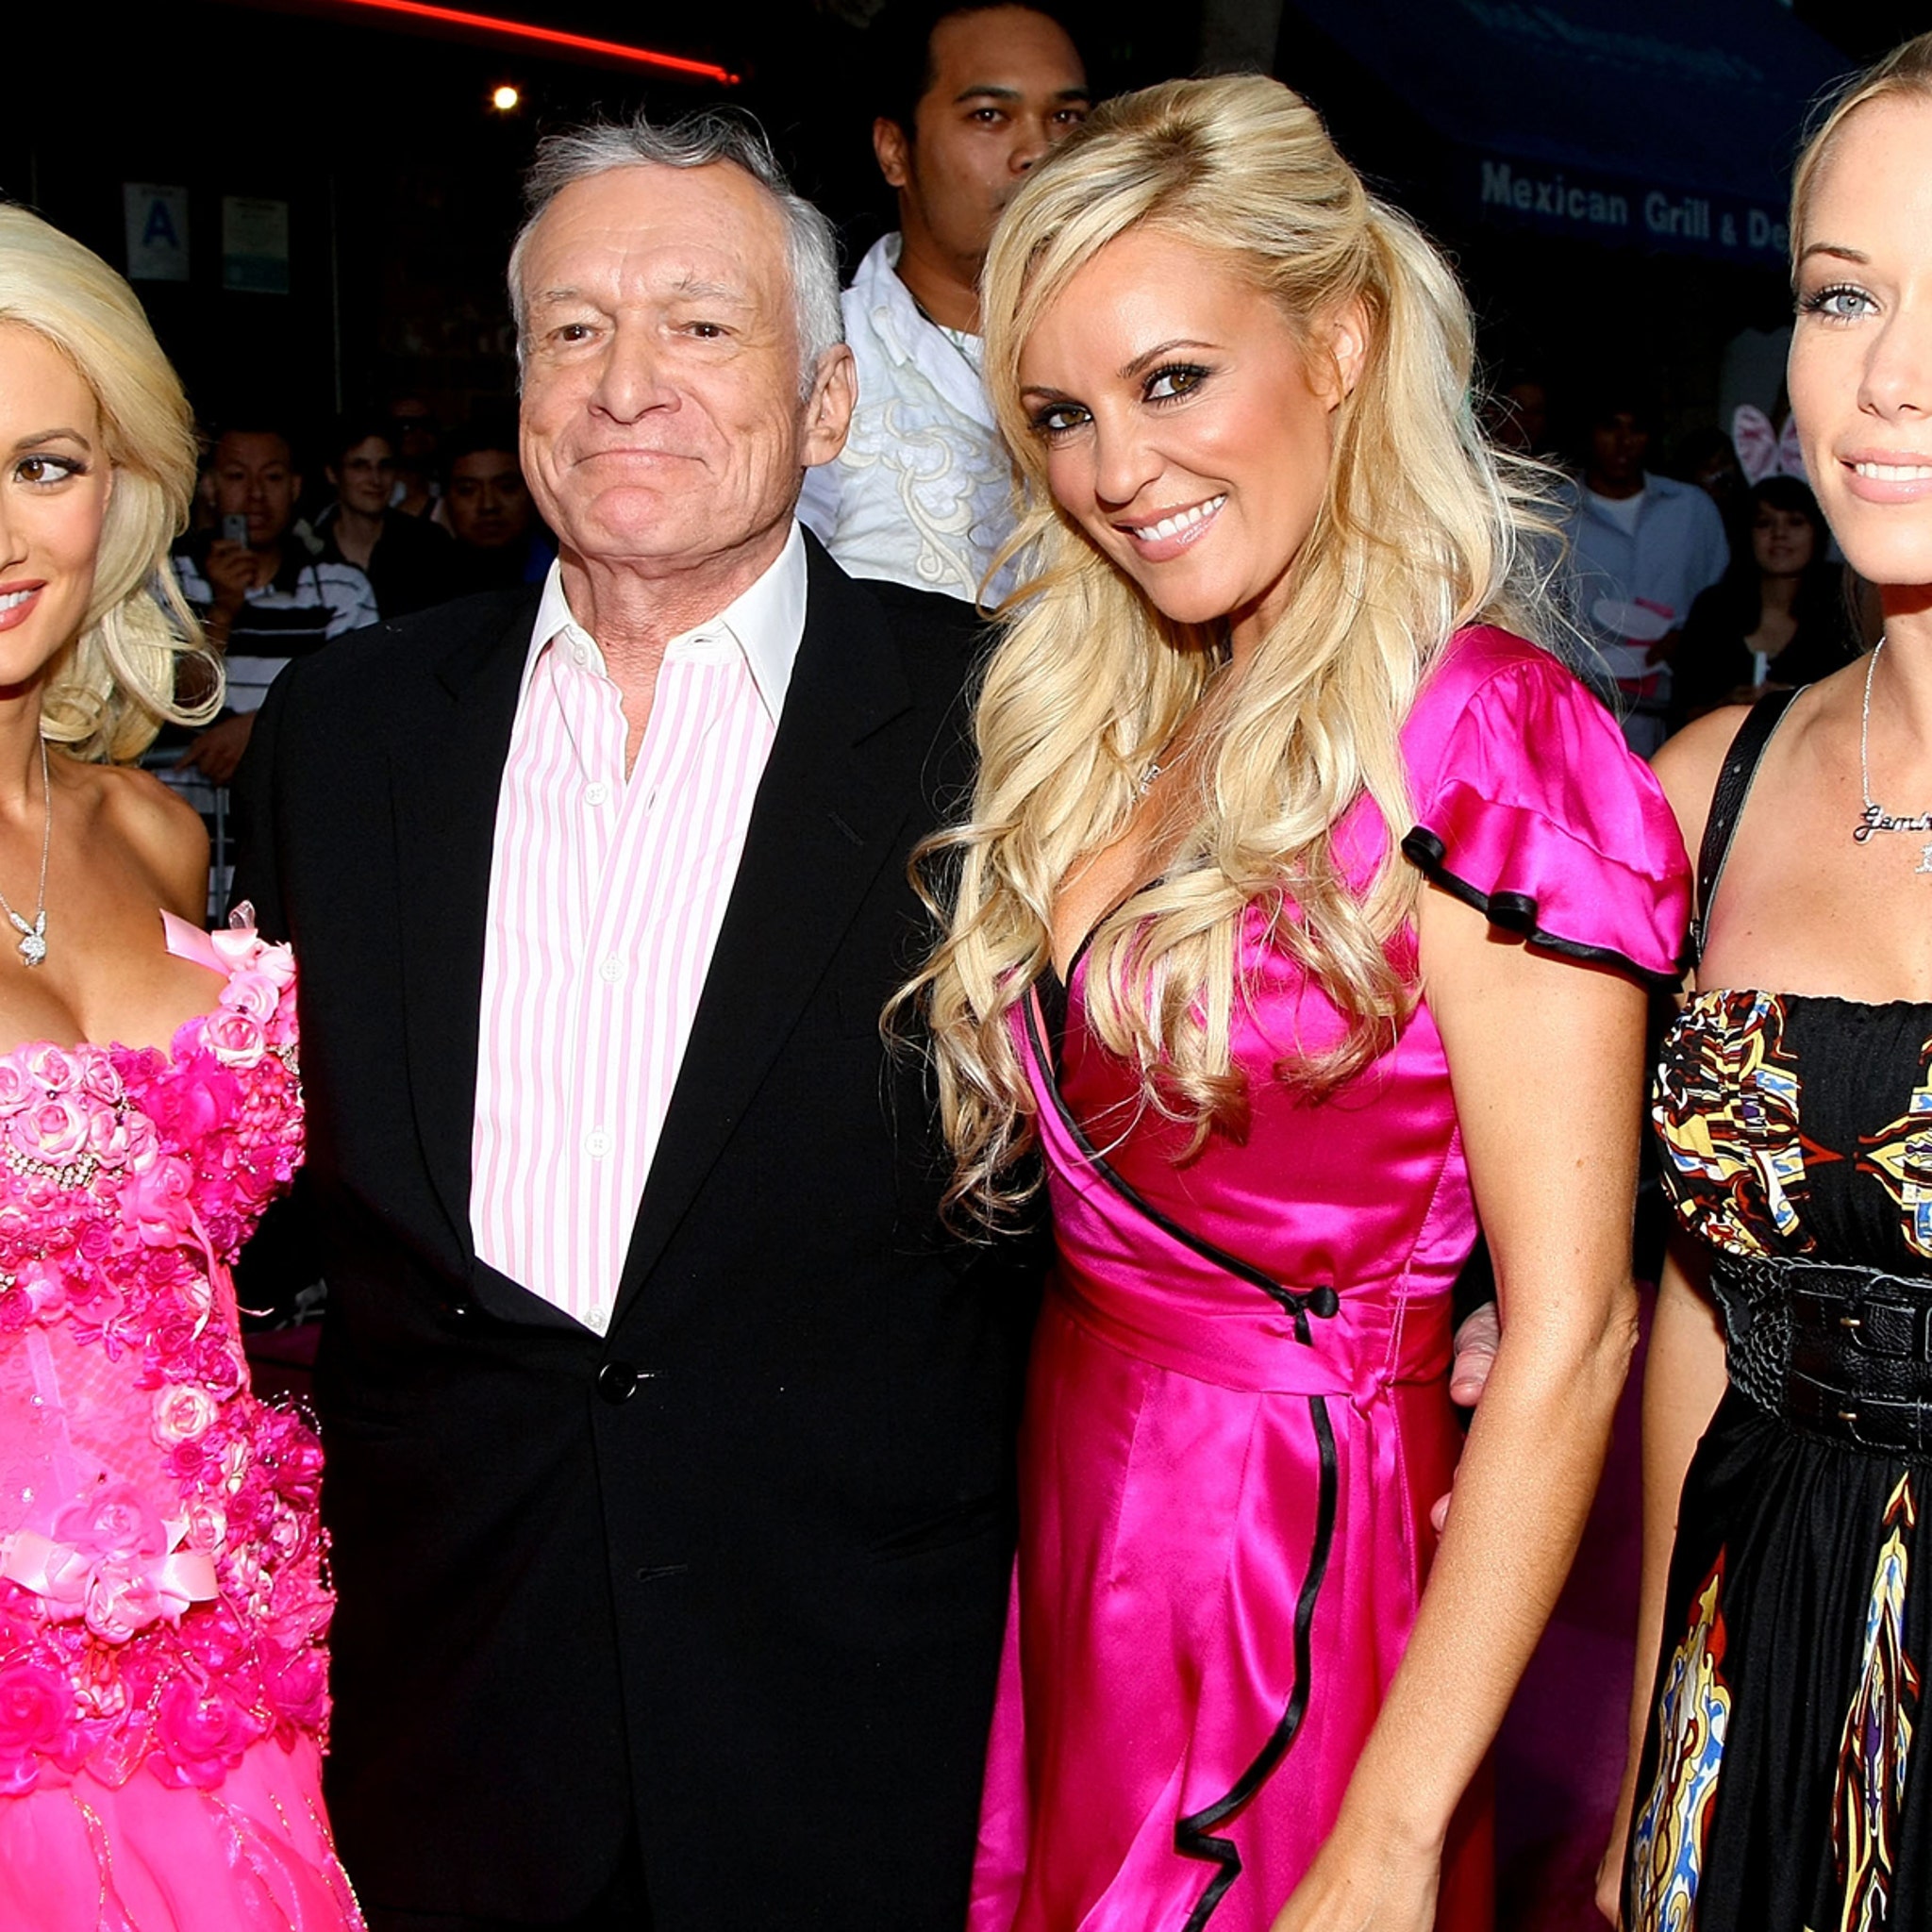 Holly Madison and Bridget Marquardt Reveal Playboy Mansion Rules and Hefs Manipulation Tactics picture